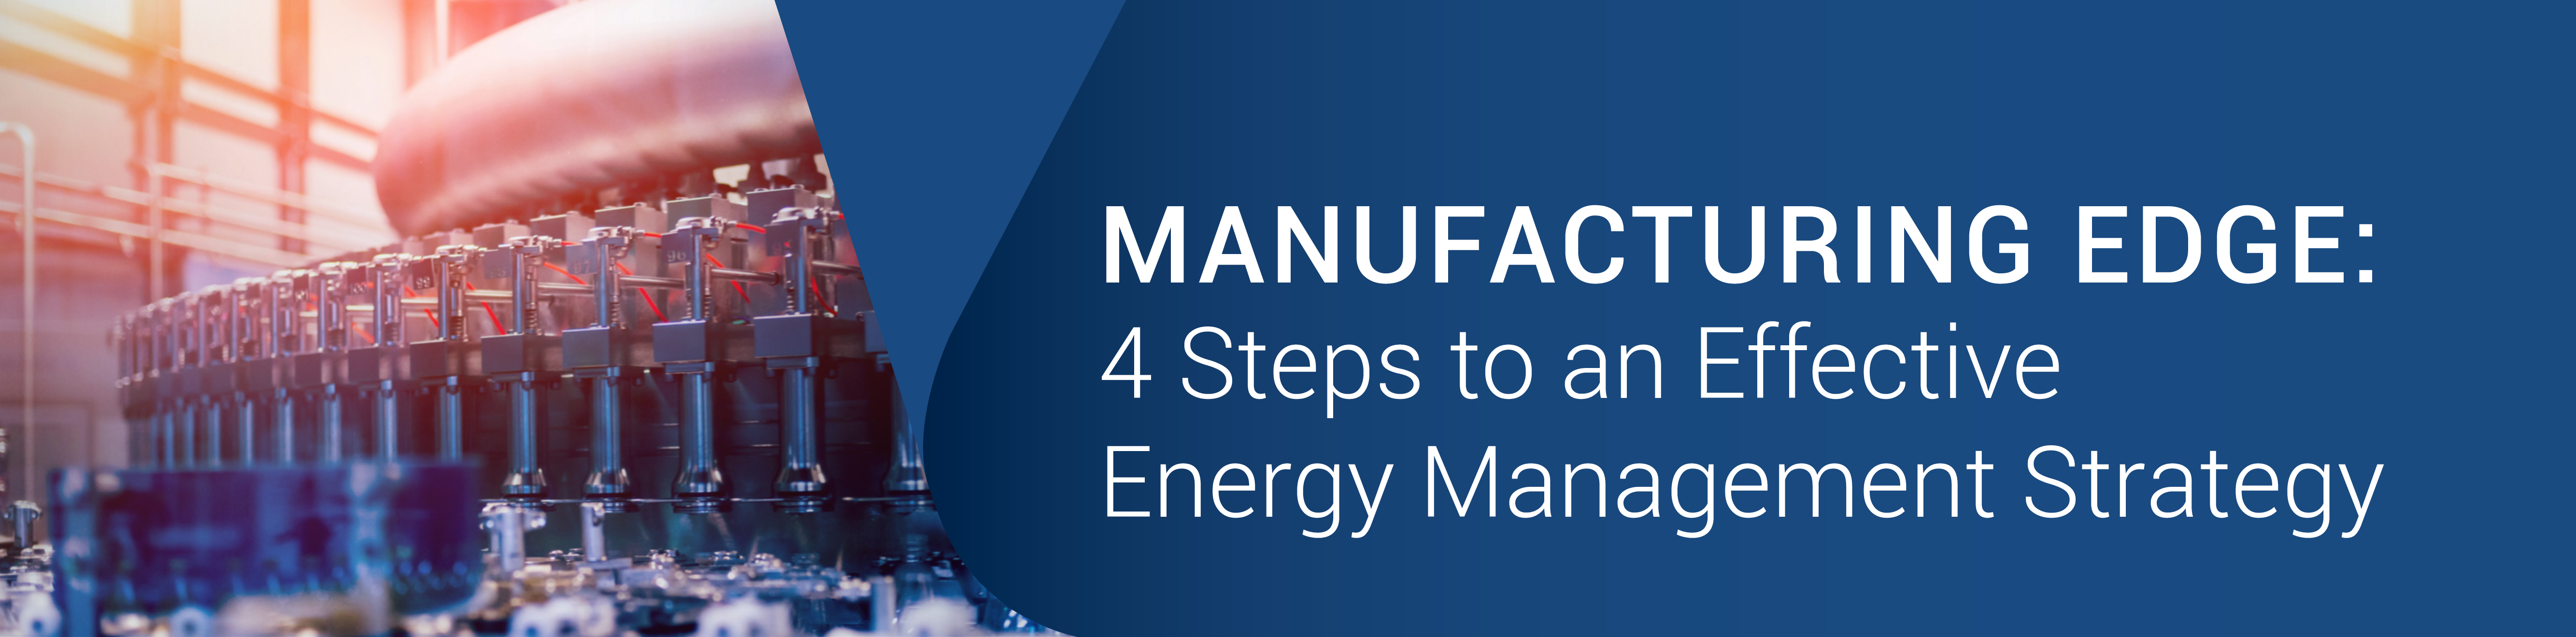 4 Steps to Effective Energy Management